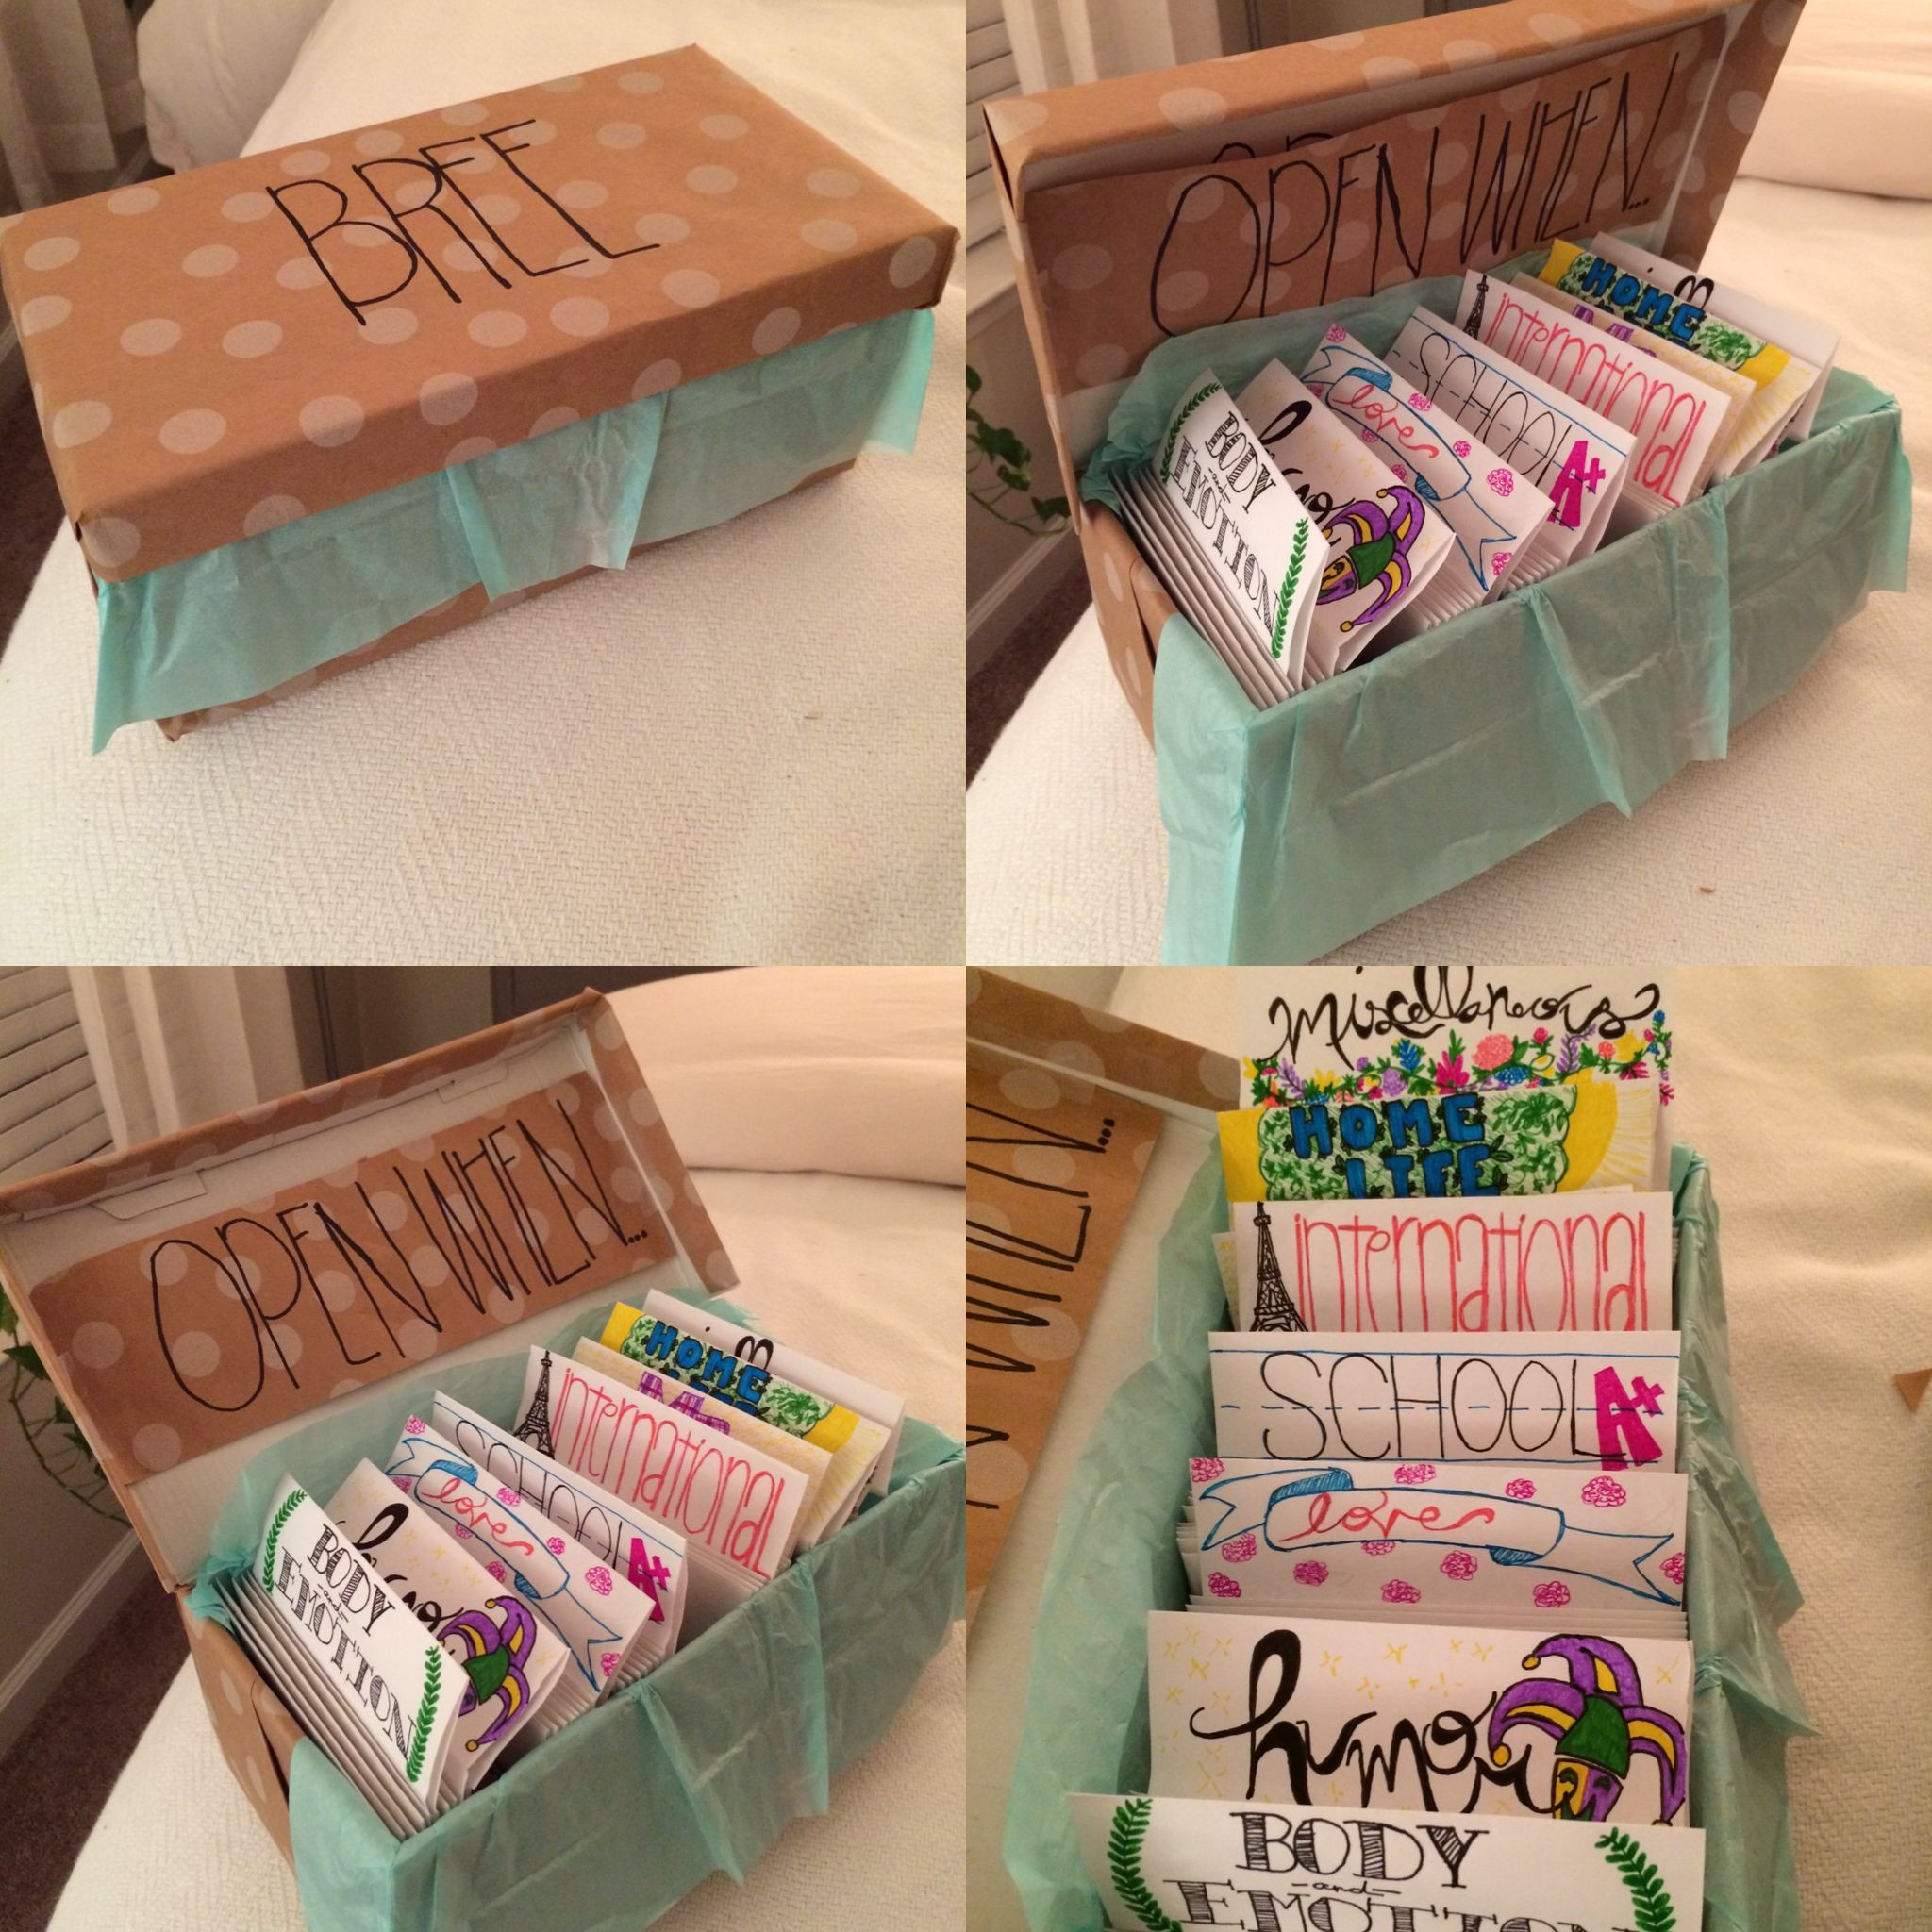 Best Friend Gift Ideas Diy
 "Open When" Letters for long distance friendship With